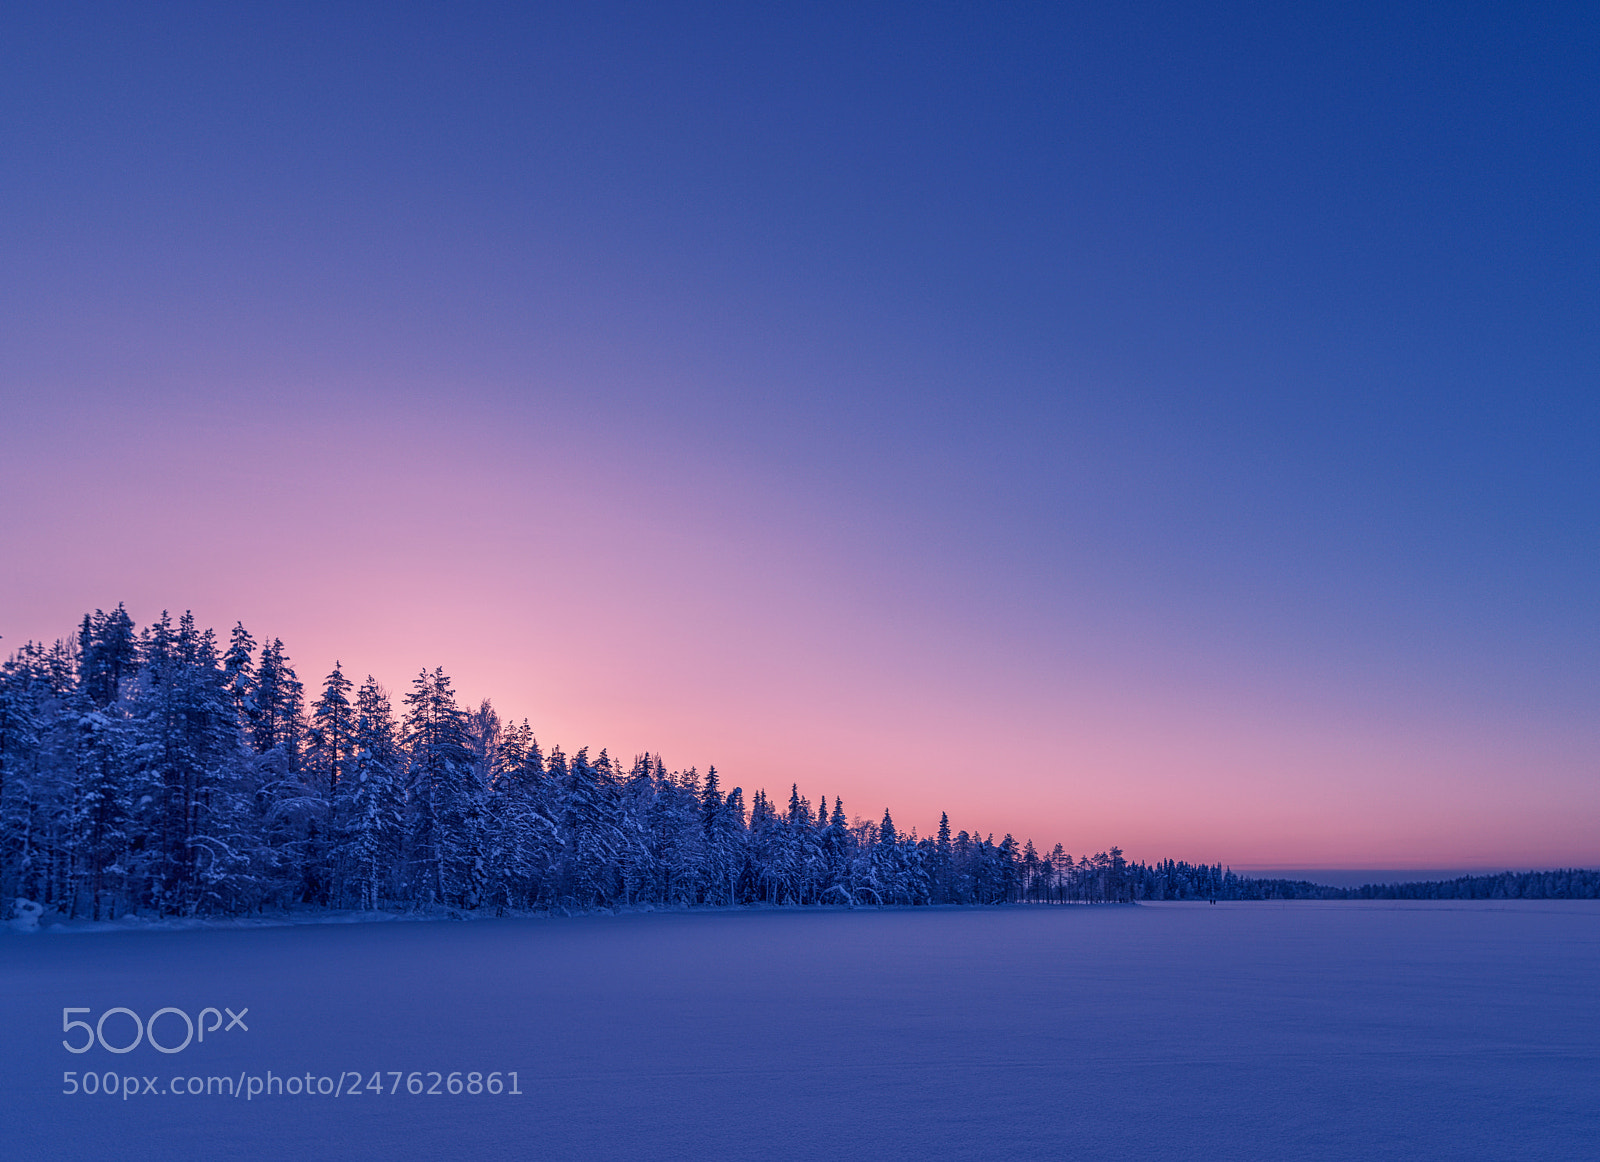 Pentax K-1 sample photo. Winter sunset in finland photography